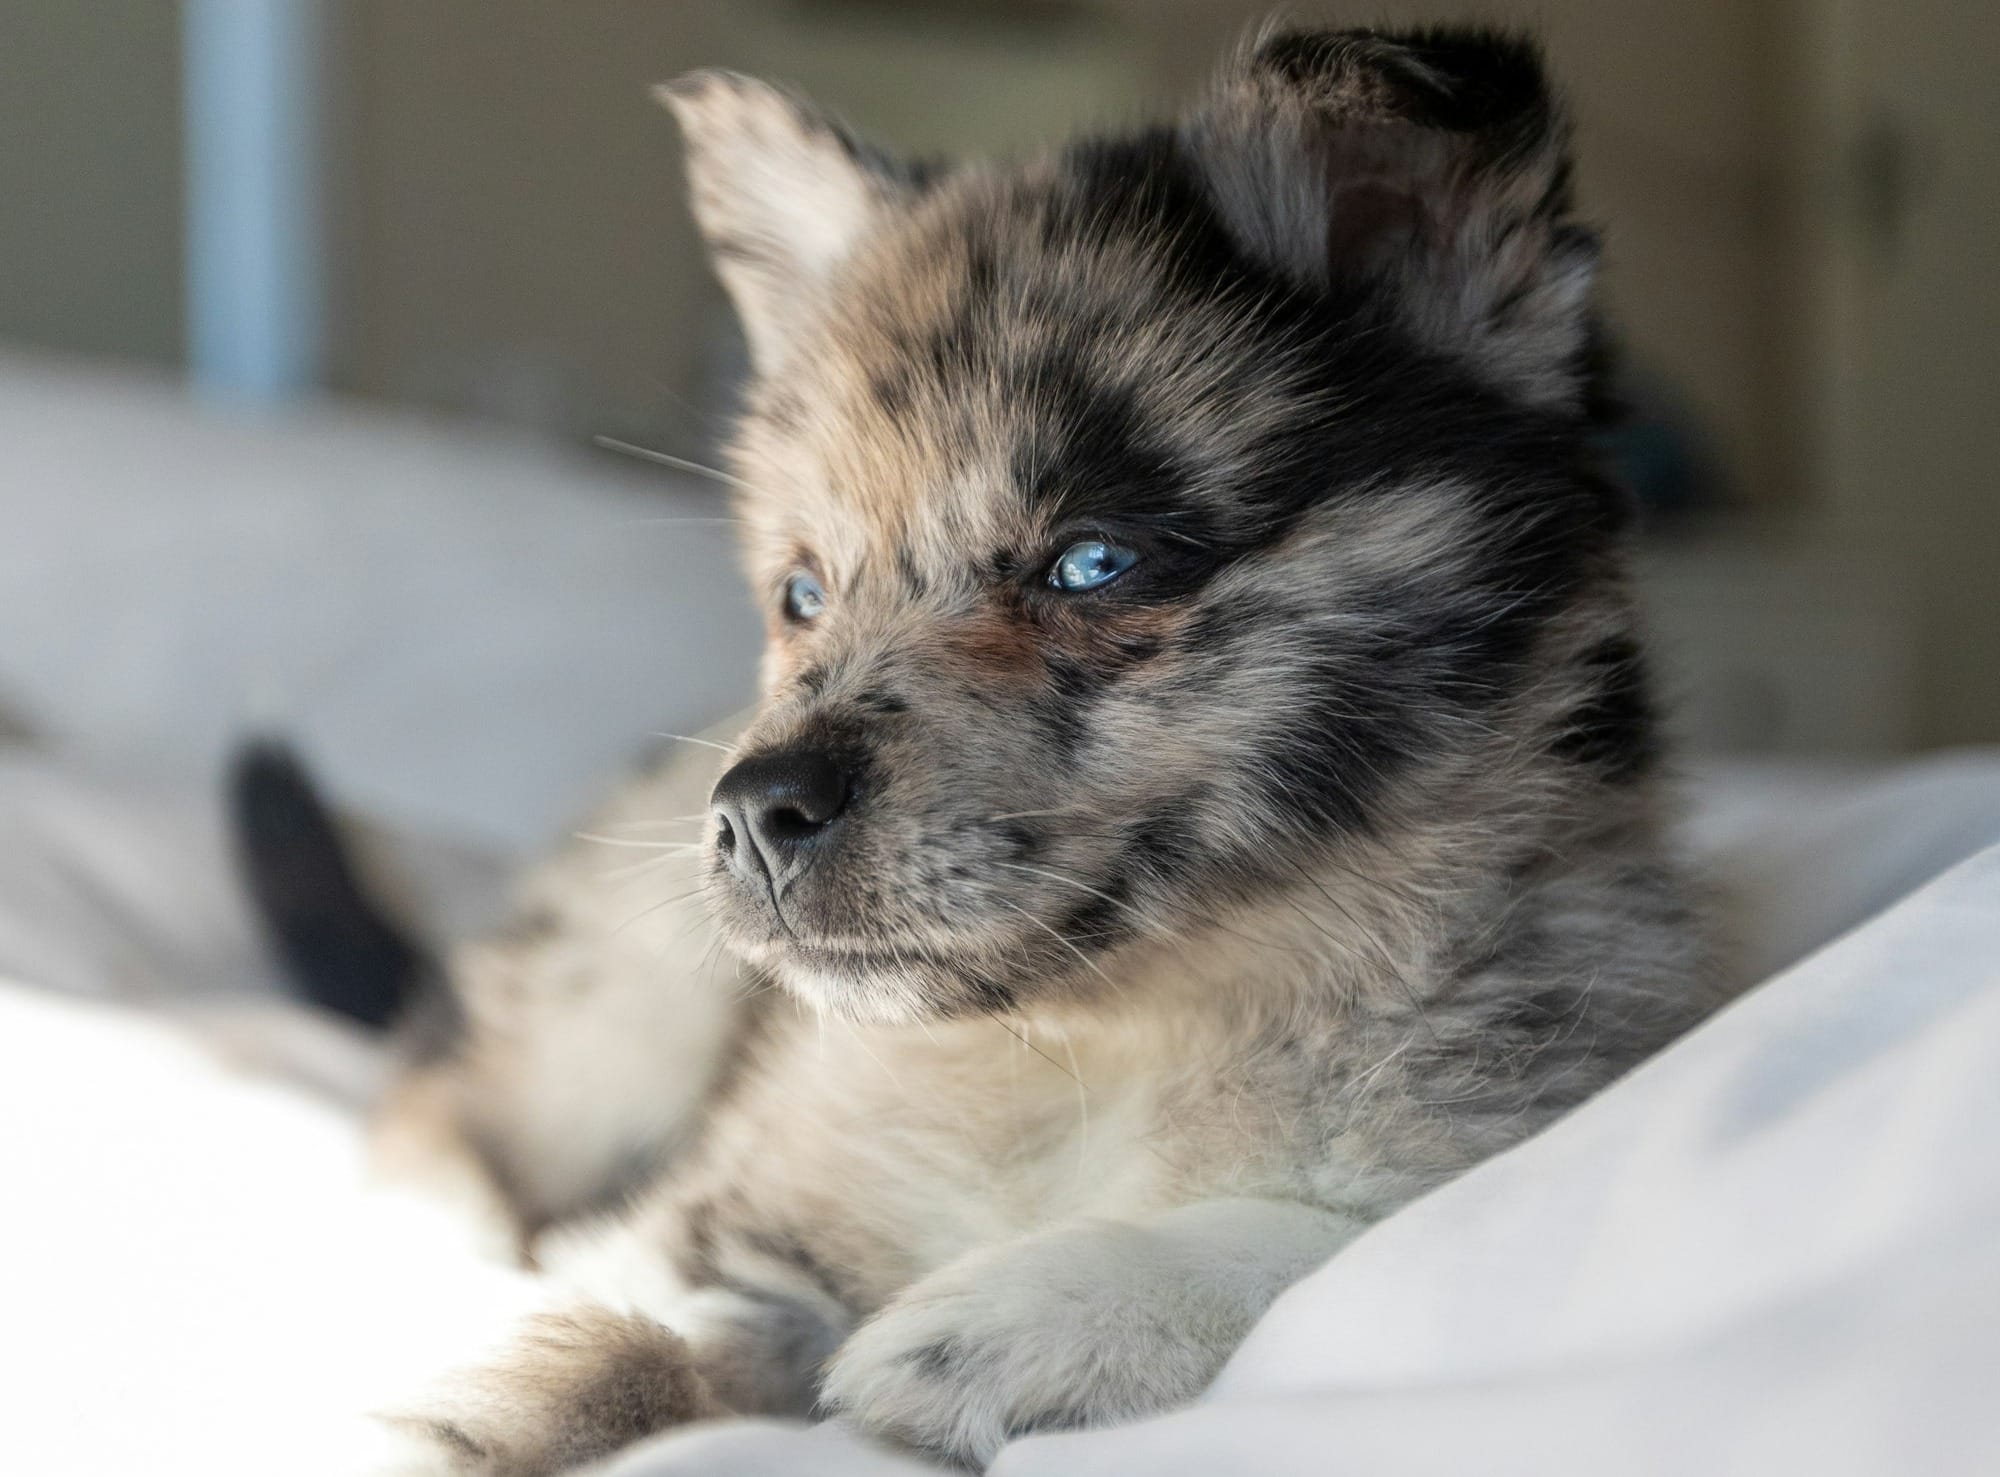 Are Pomskies Easy to Train